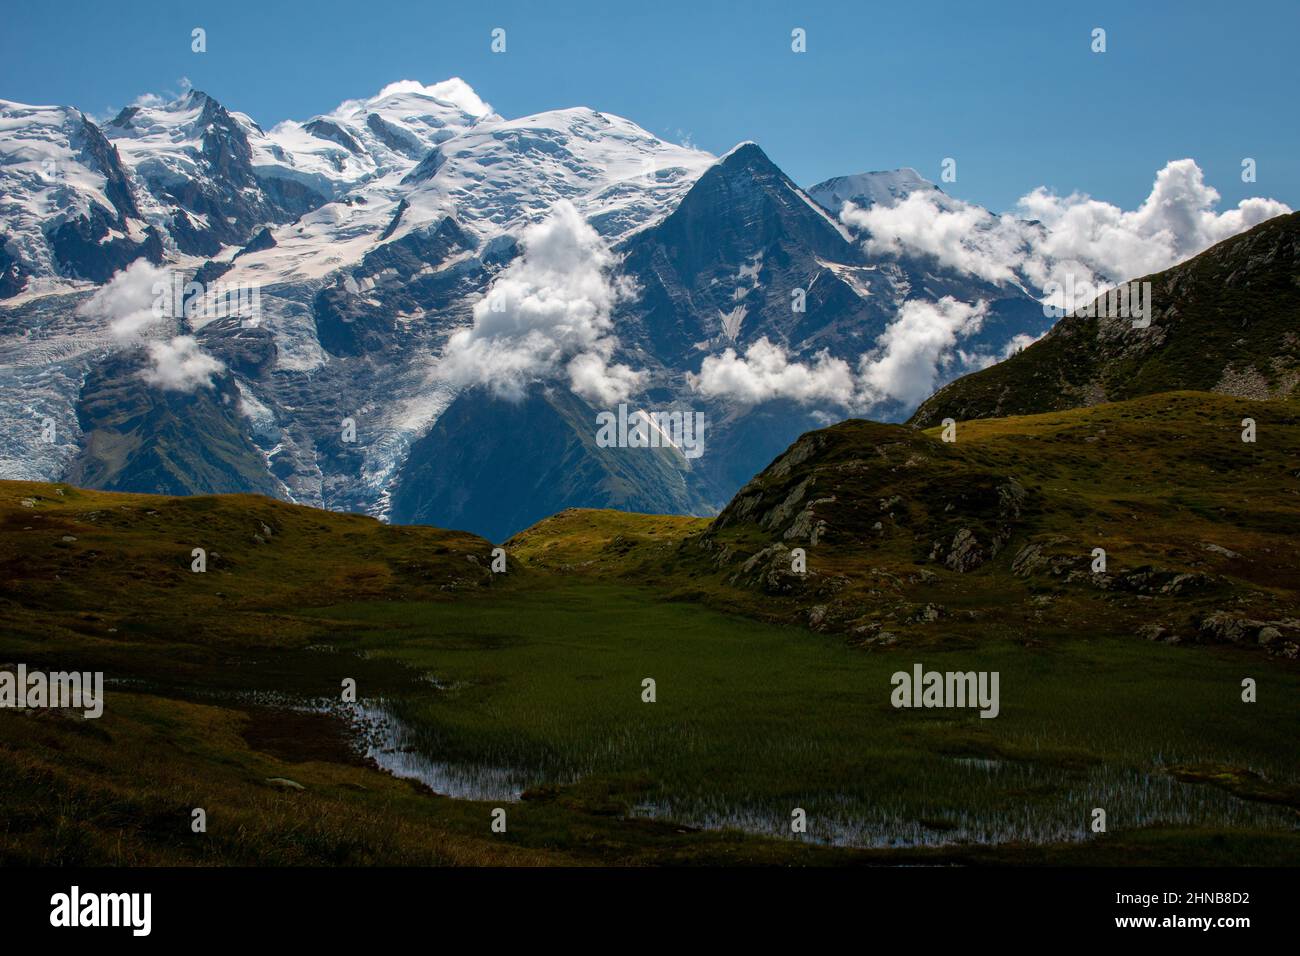 The view of Mont Blanc from the hiking trail between Refuge de Bellachat and Aiguillette des Houches, French Alps. Stock Photo